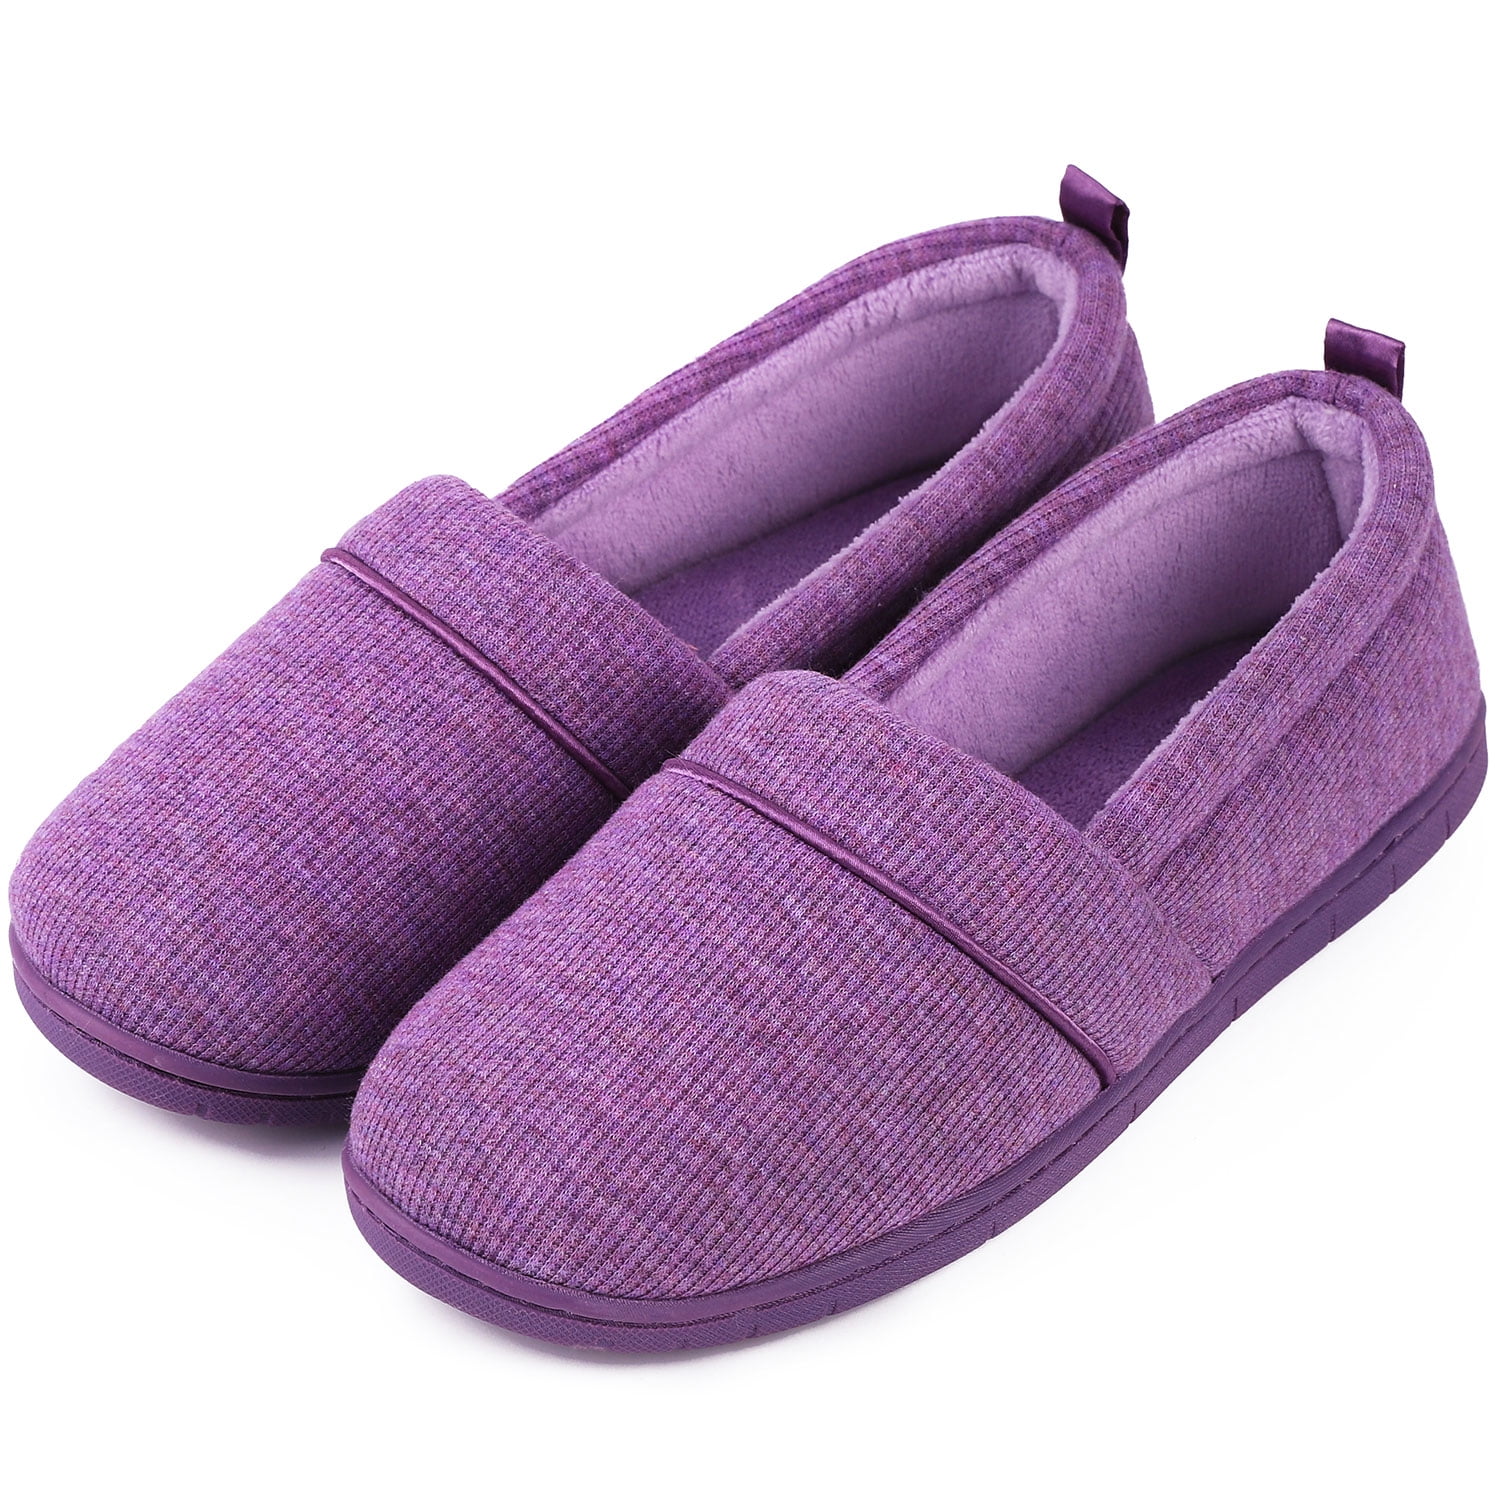 Oyang Men's Fuzzy House Slippers with Arch Support Orthotic Heel Cup Sandals,  Velcro Slippers Comfy Memory Foam Slippers - Walmart.com